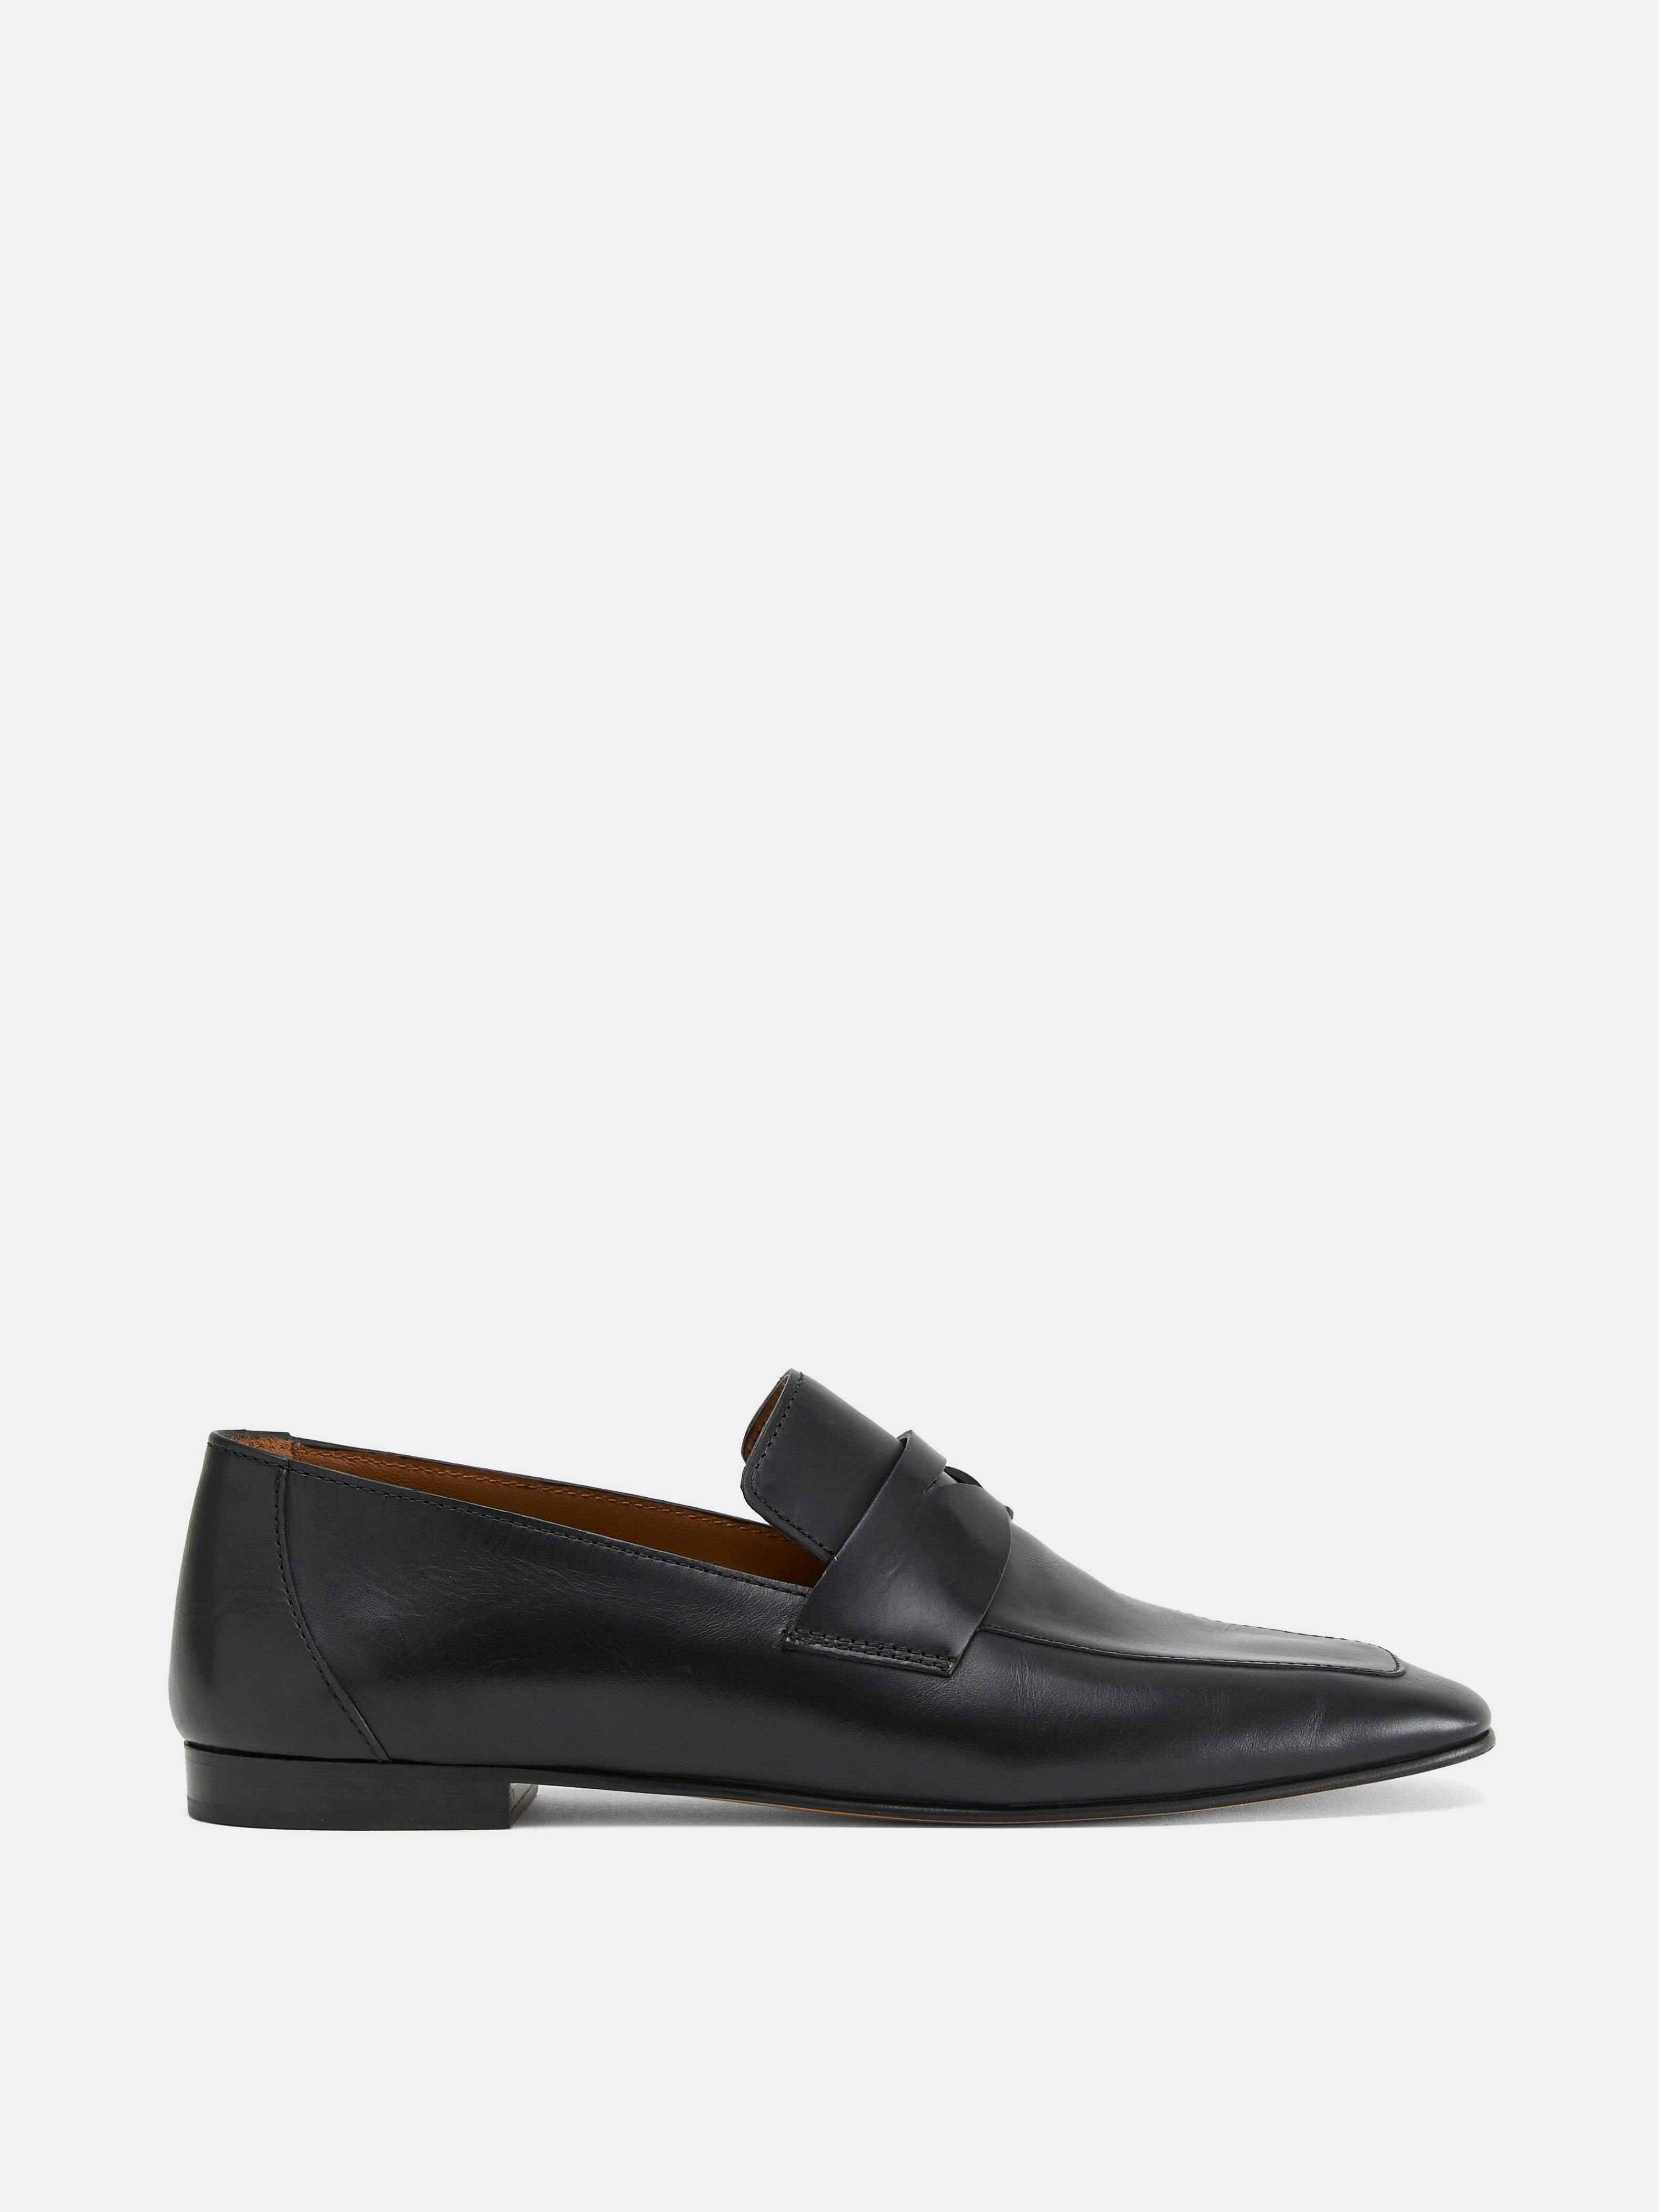 Black placket leather soft loafers